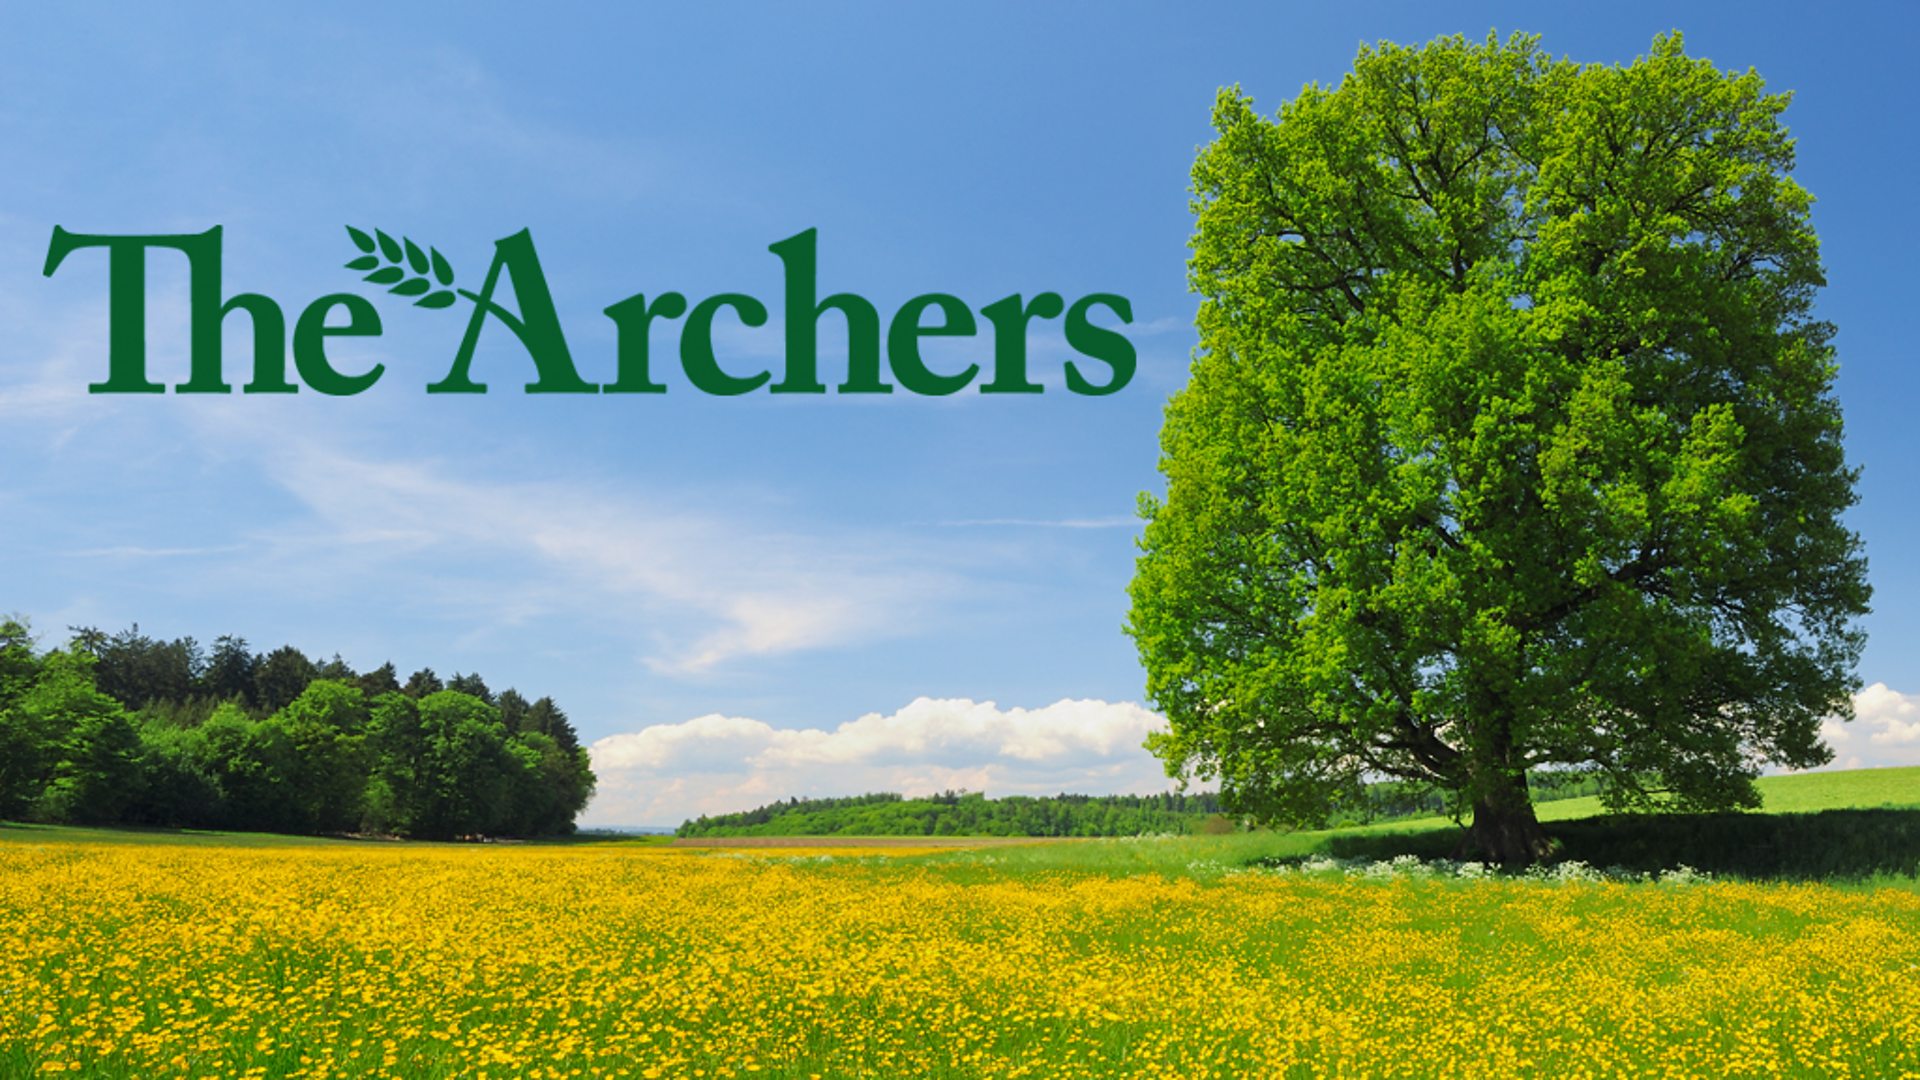 BBC Radio 4 - The Archers - About the Archers